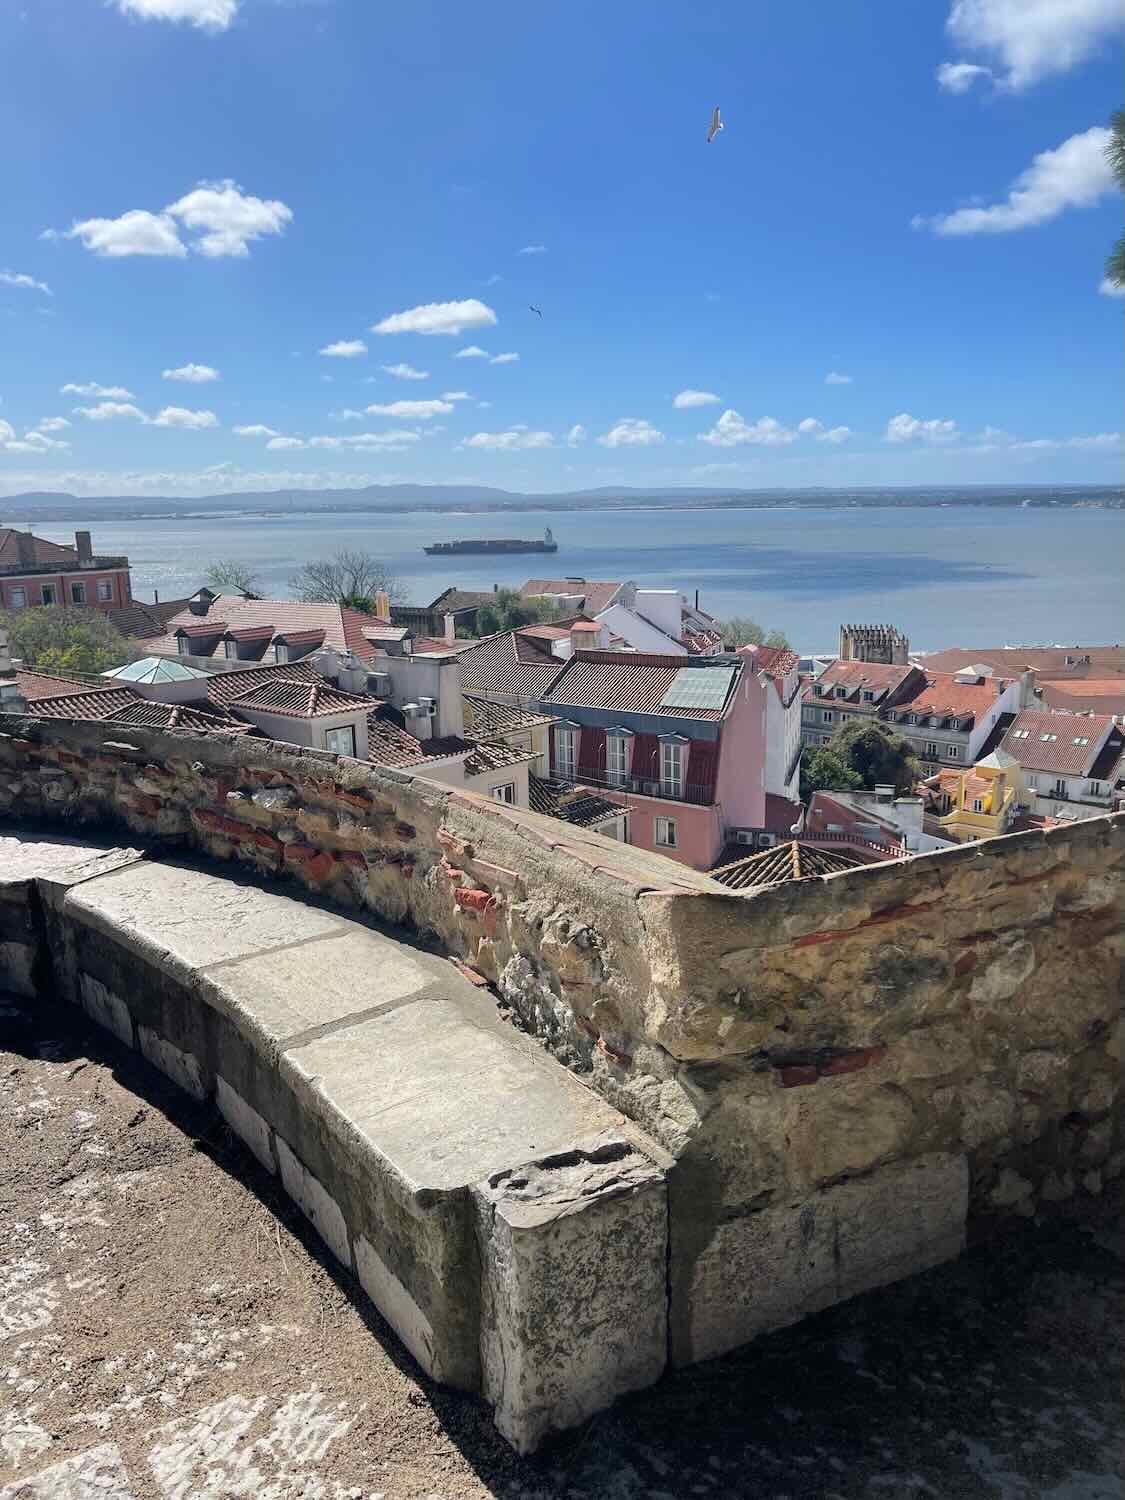 A scenic view of Lisbon's traditional architecture and the Tagus River in the background, captured from a high viewpoint on a sunny day.